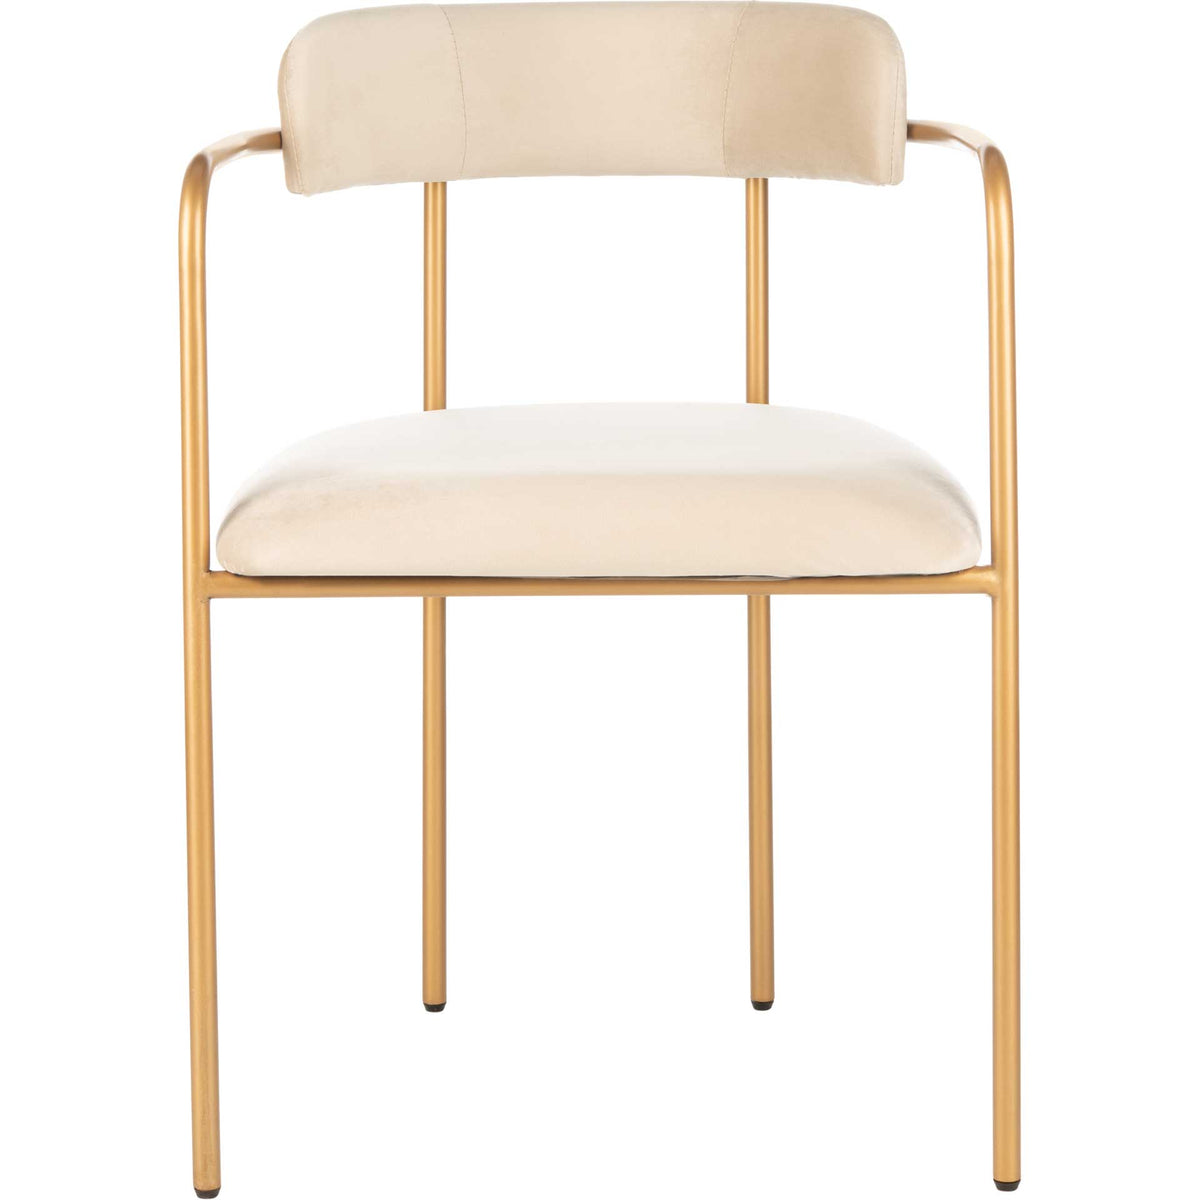 Callahan Side Chair Beige/Gold (Set of 2)